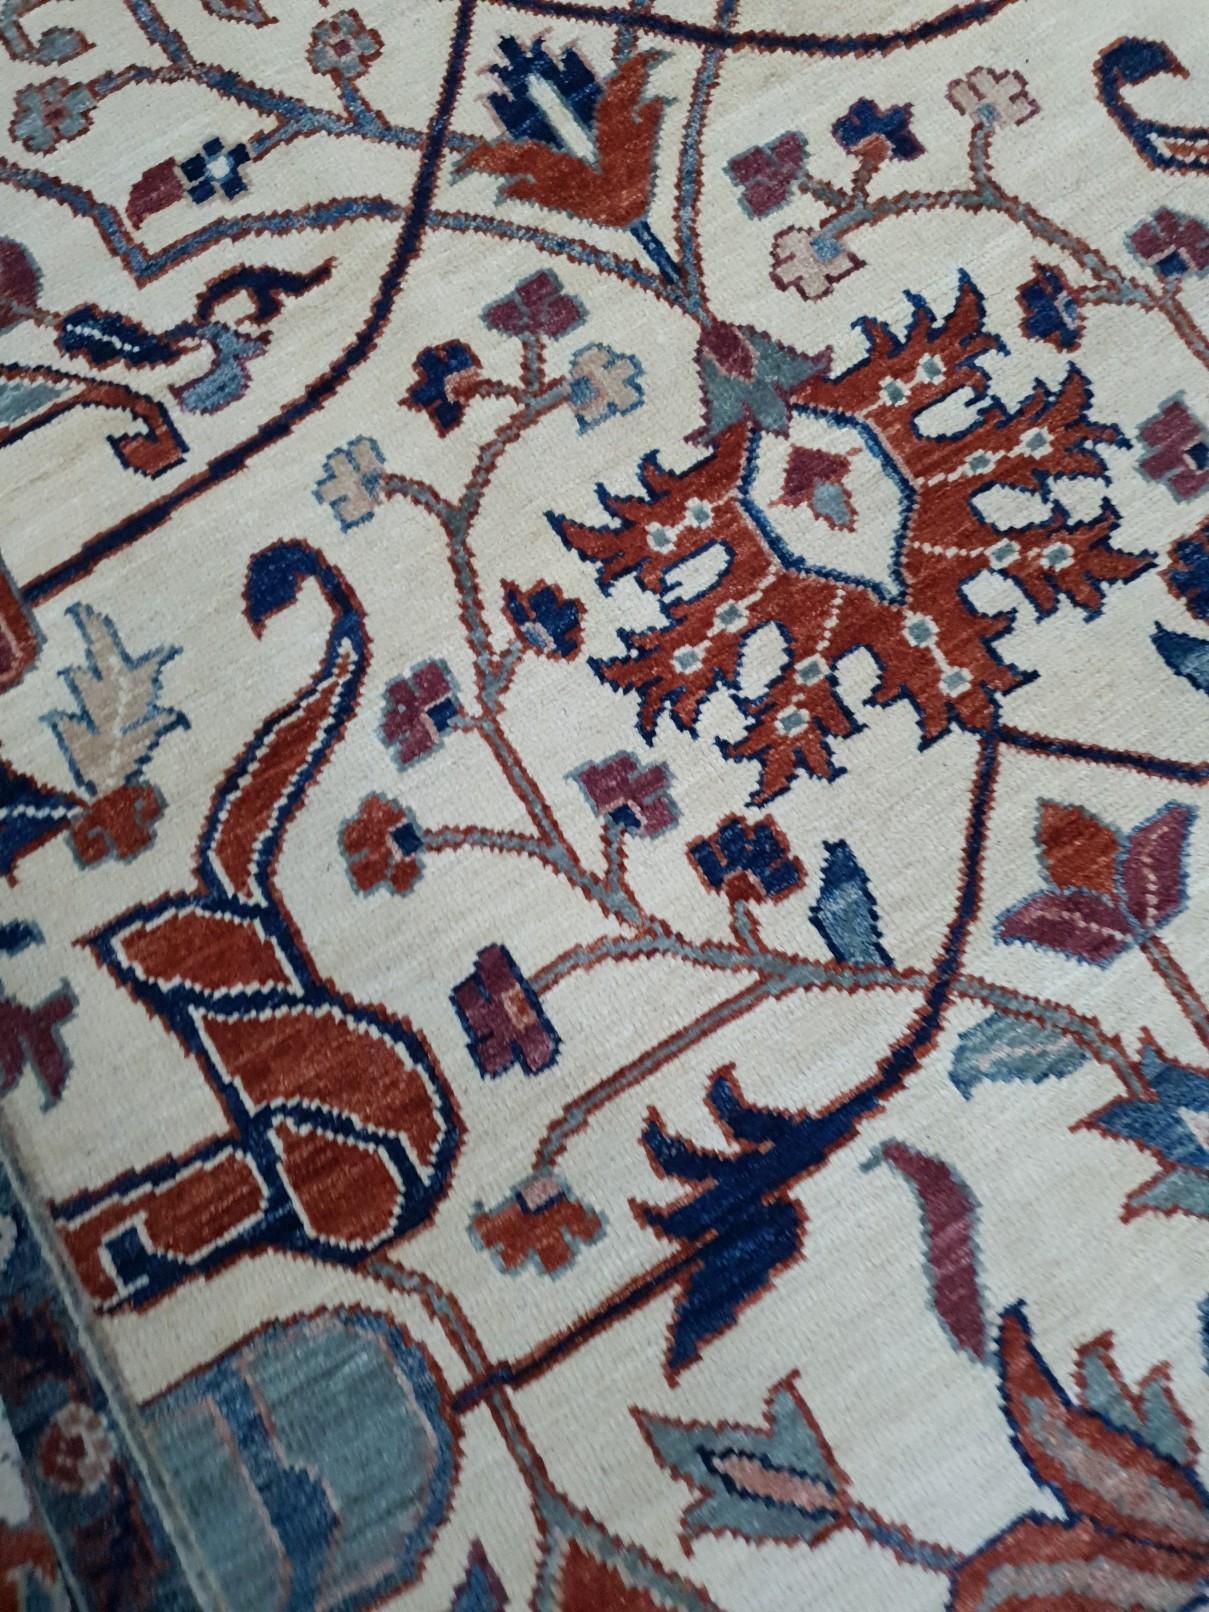 A huge sized rug with design in style of Farahan.
This beautiful rug was hand knotted to fit 21st century interior needs. The background is in beige, the border is a brownish red with floral blue designs.
Farahan design rugs are very looked after